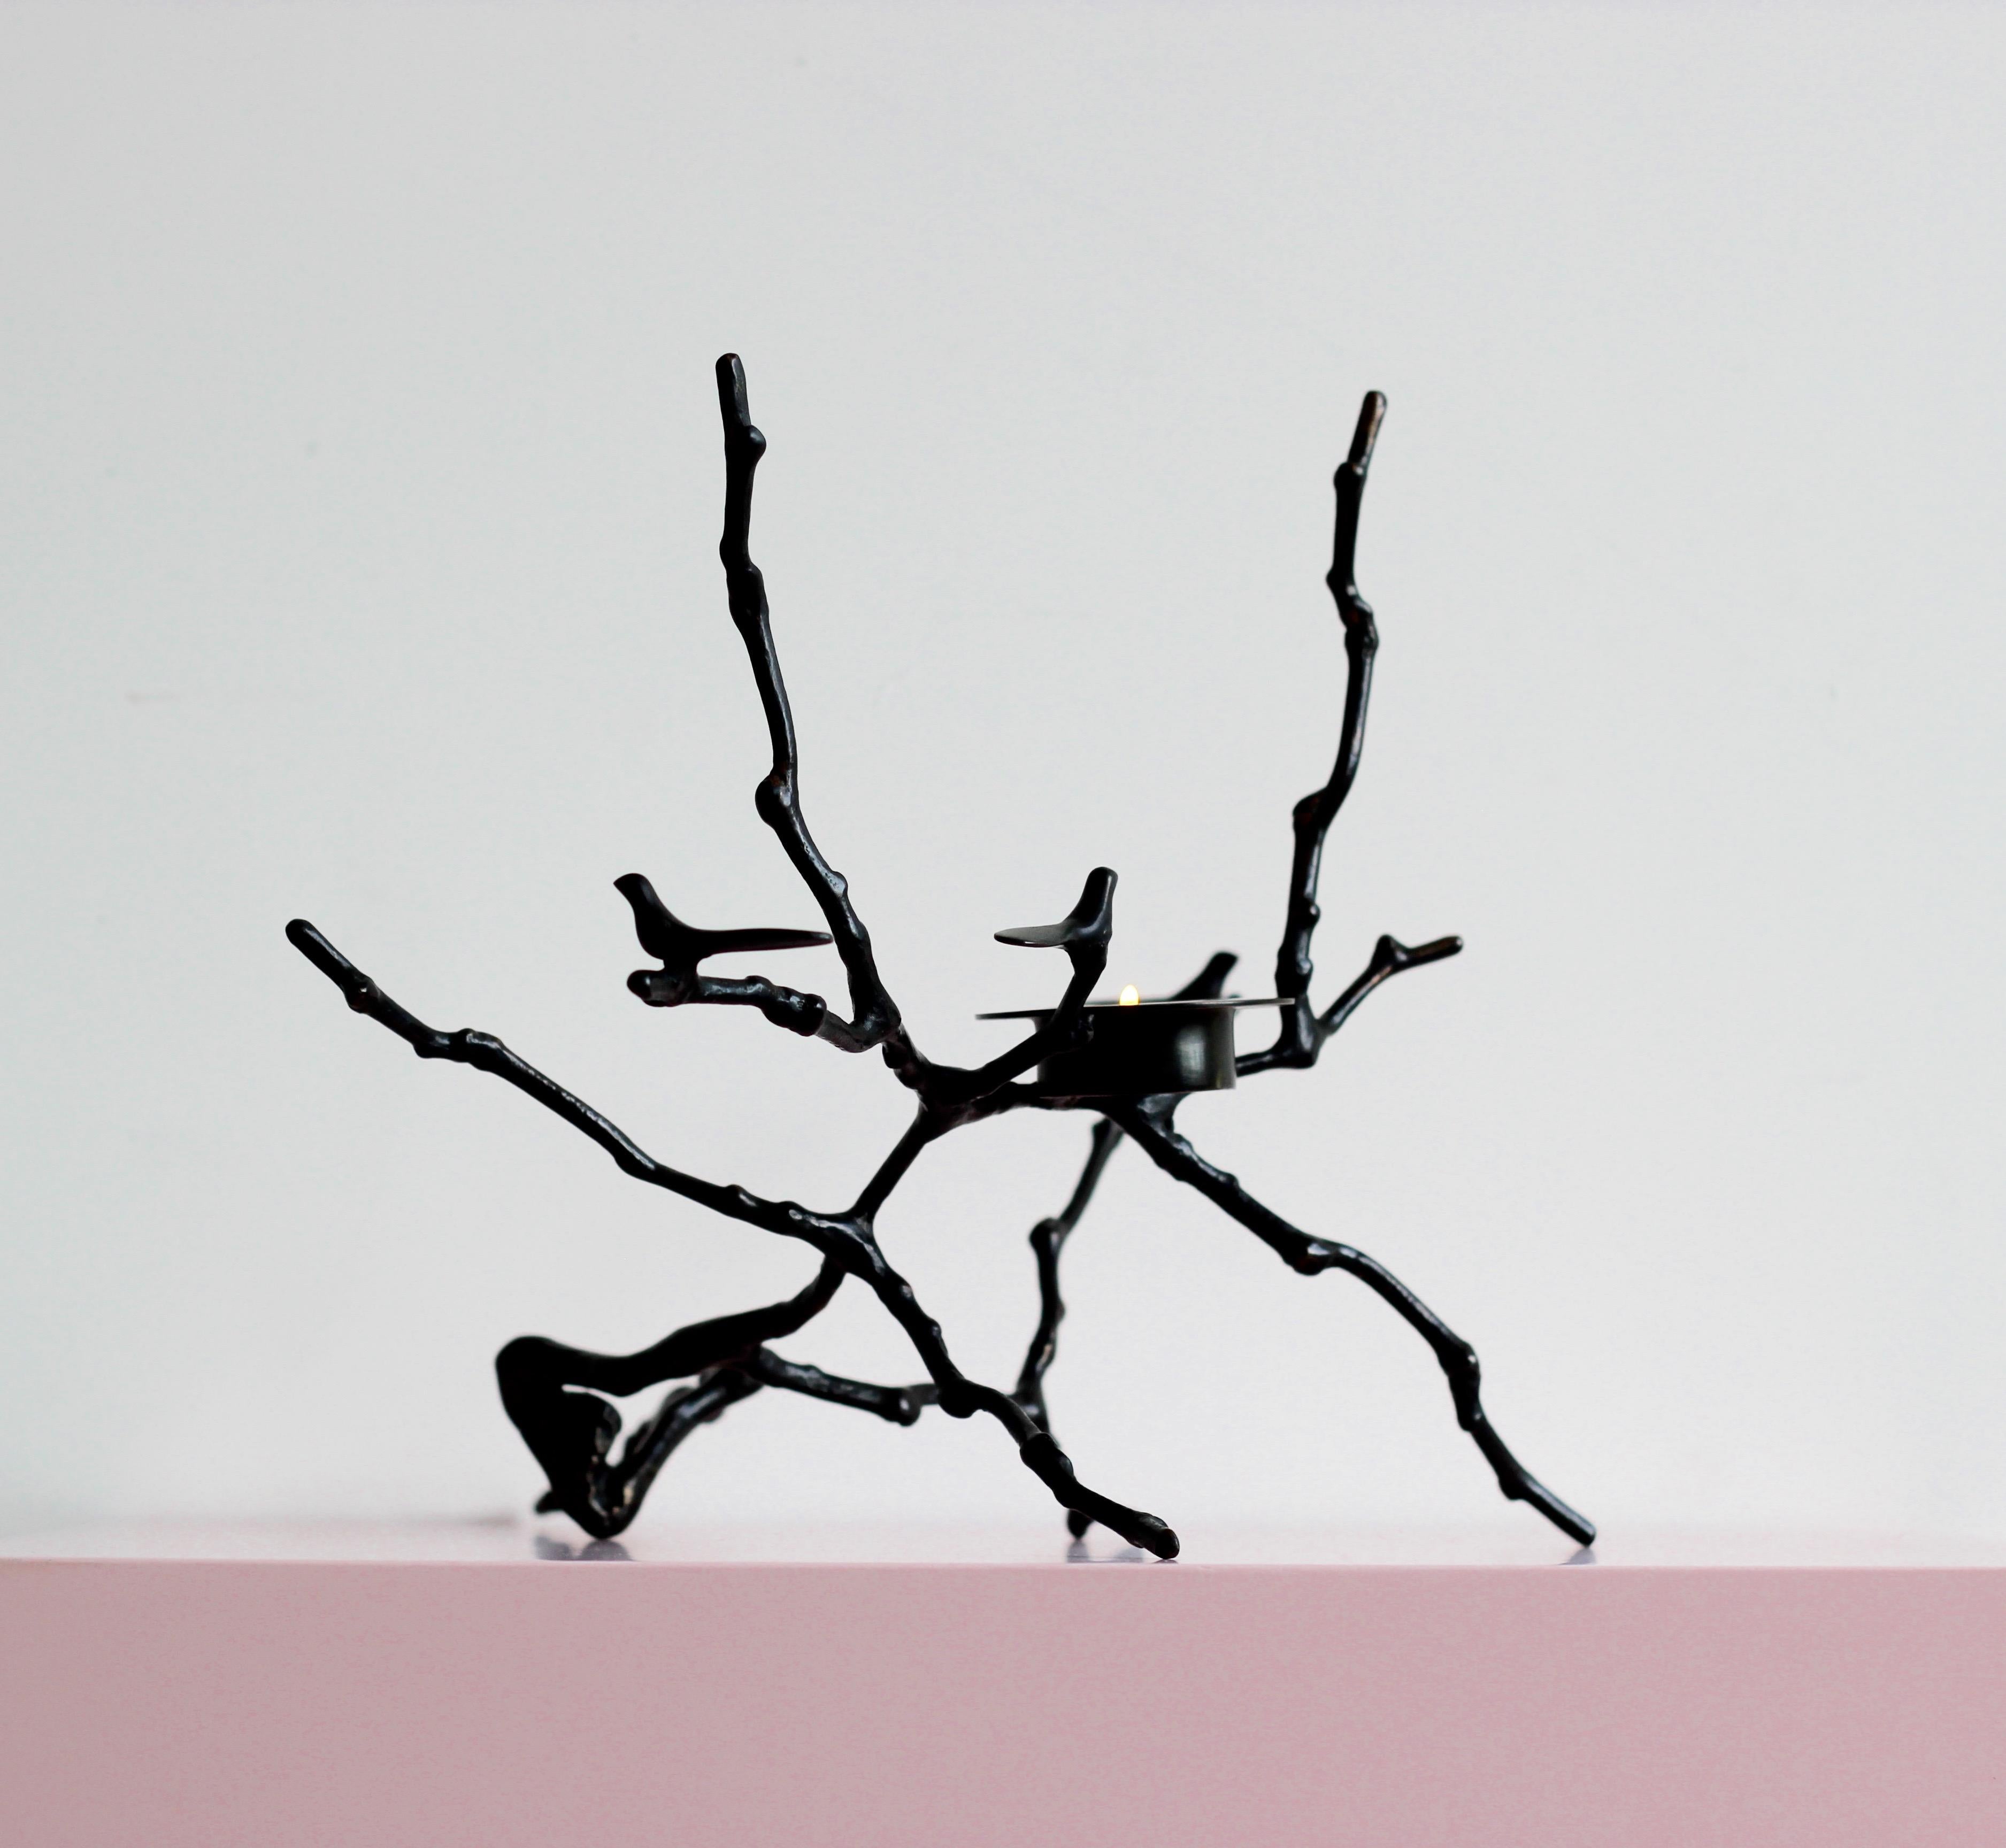 Original, unique and cast in bronze, creating sumptuous and unusual decorative elements for beautiful homes.

Each of these splendid bronze Magnolia twig t-light holders is handmade individually with incredible detail. Cast using very traditional